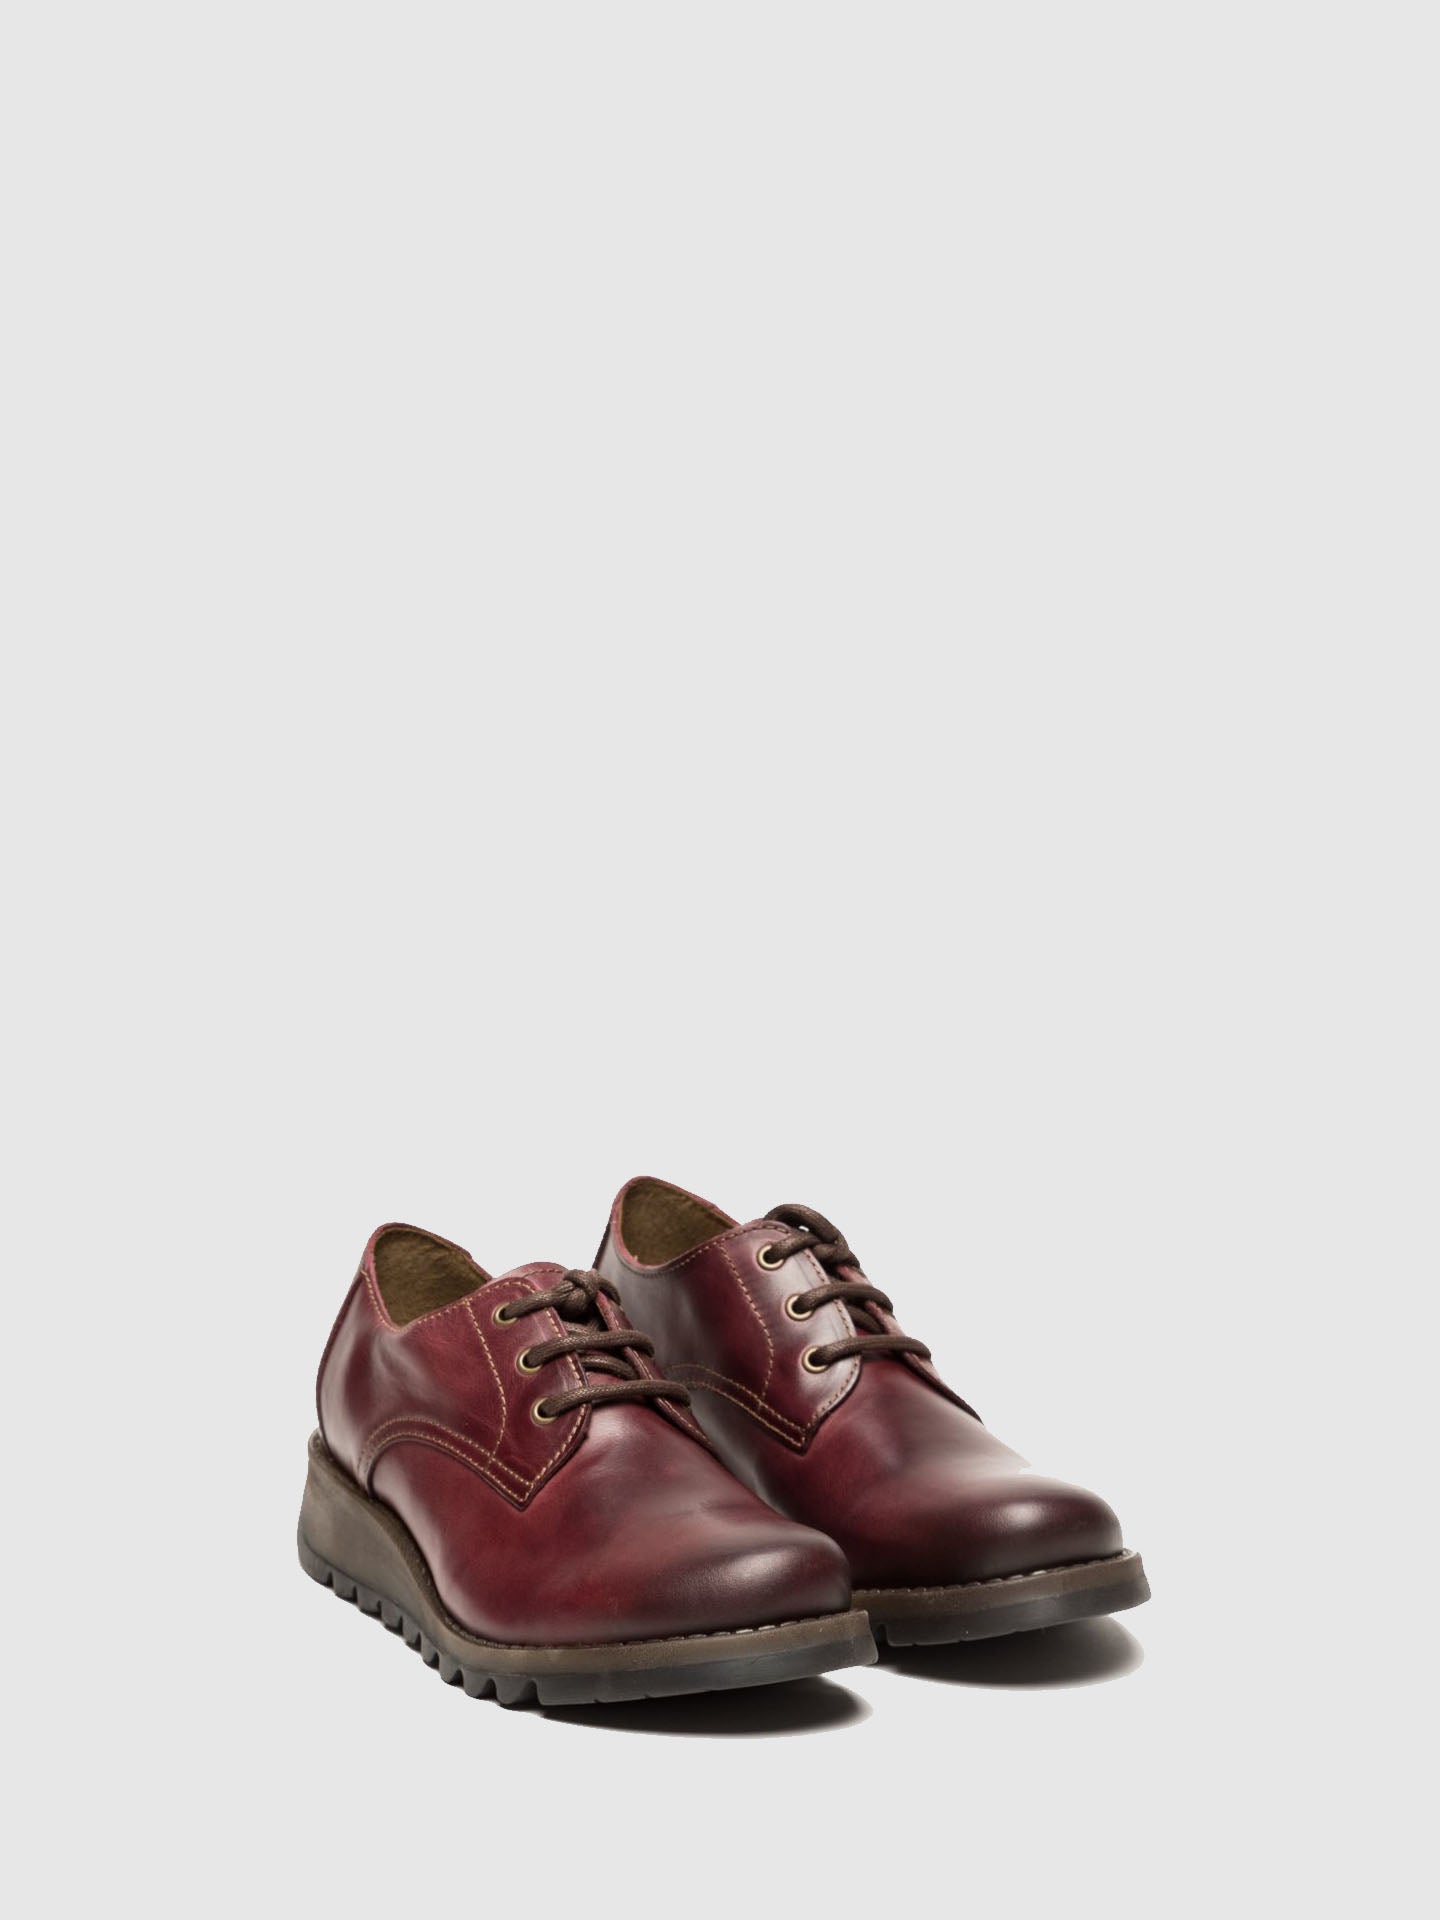 Fly London DarkRed Derby Shoes